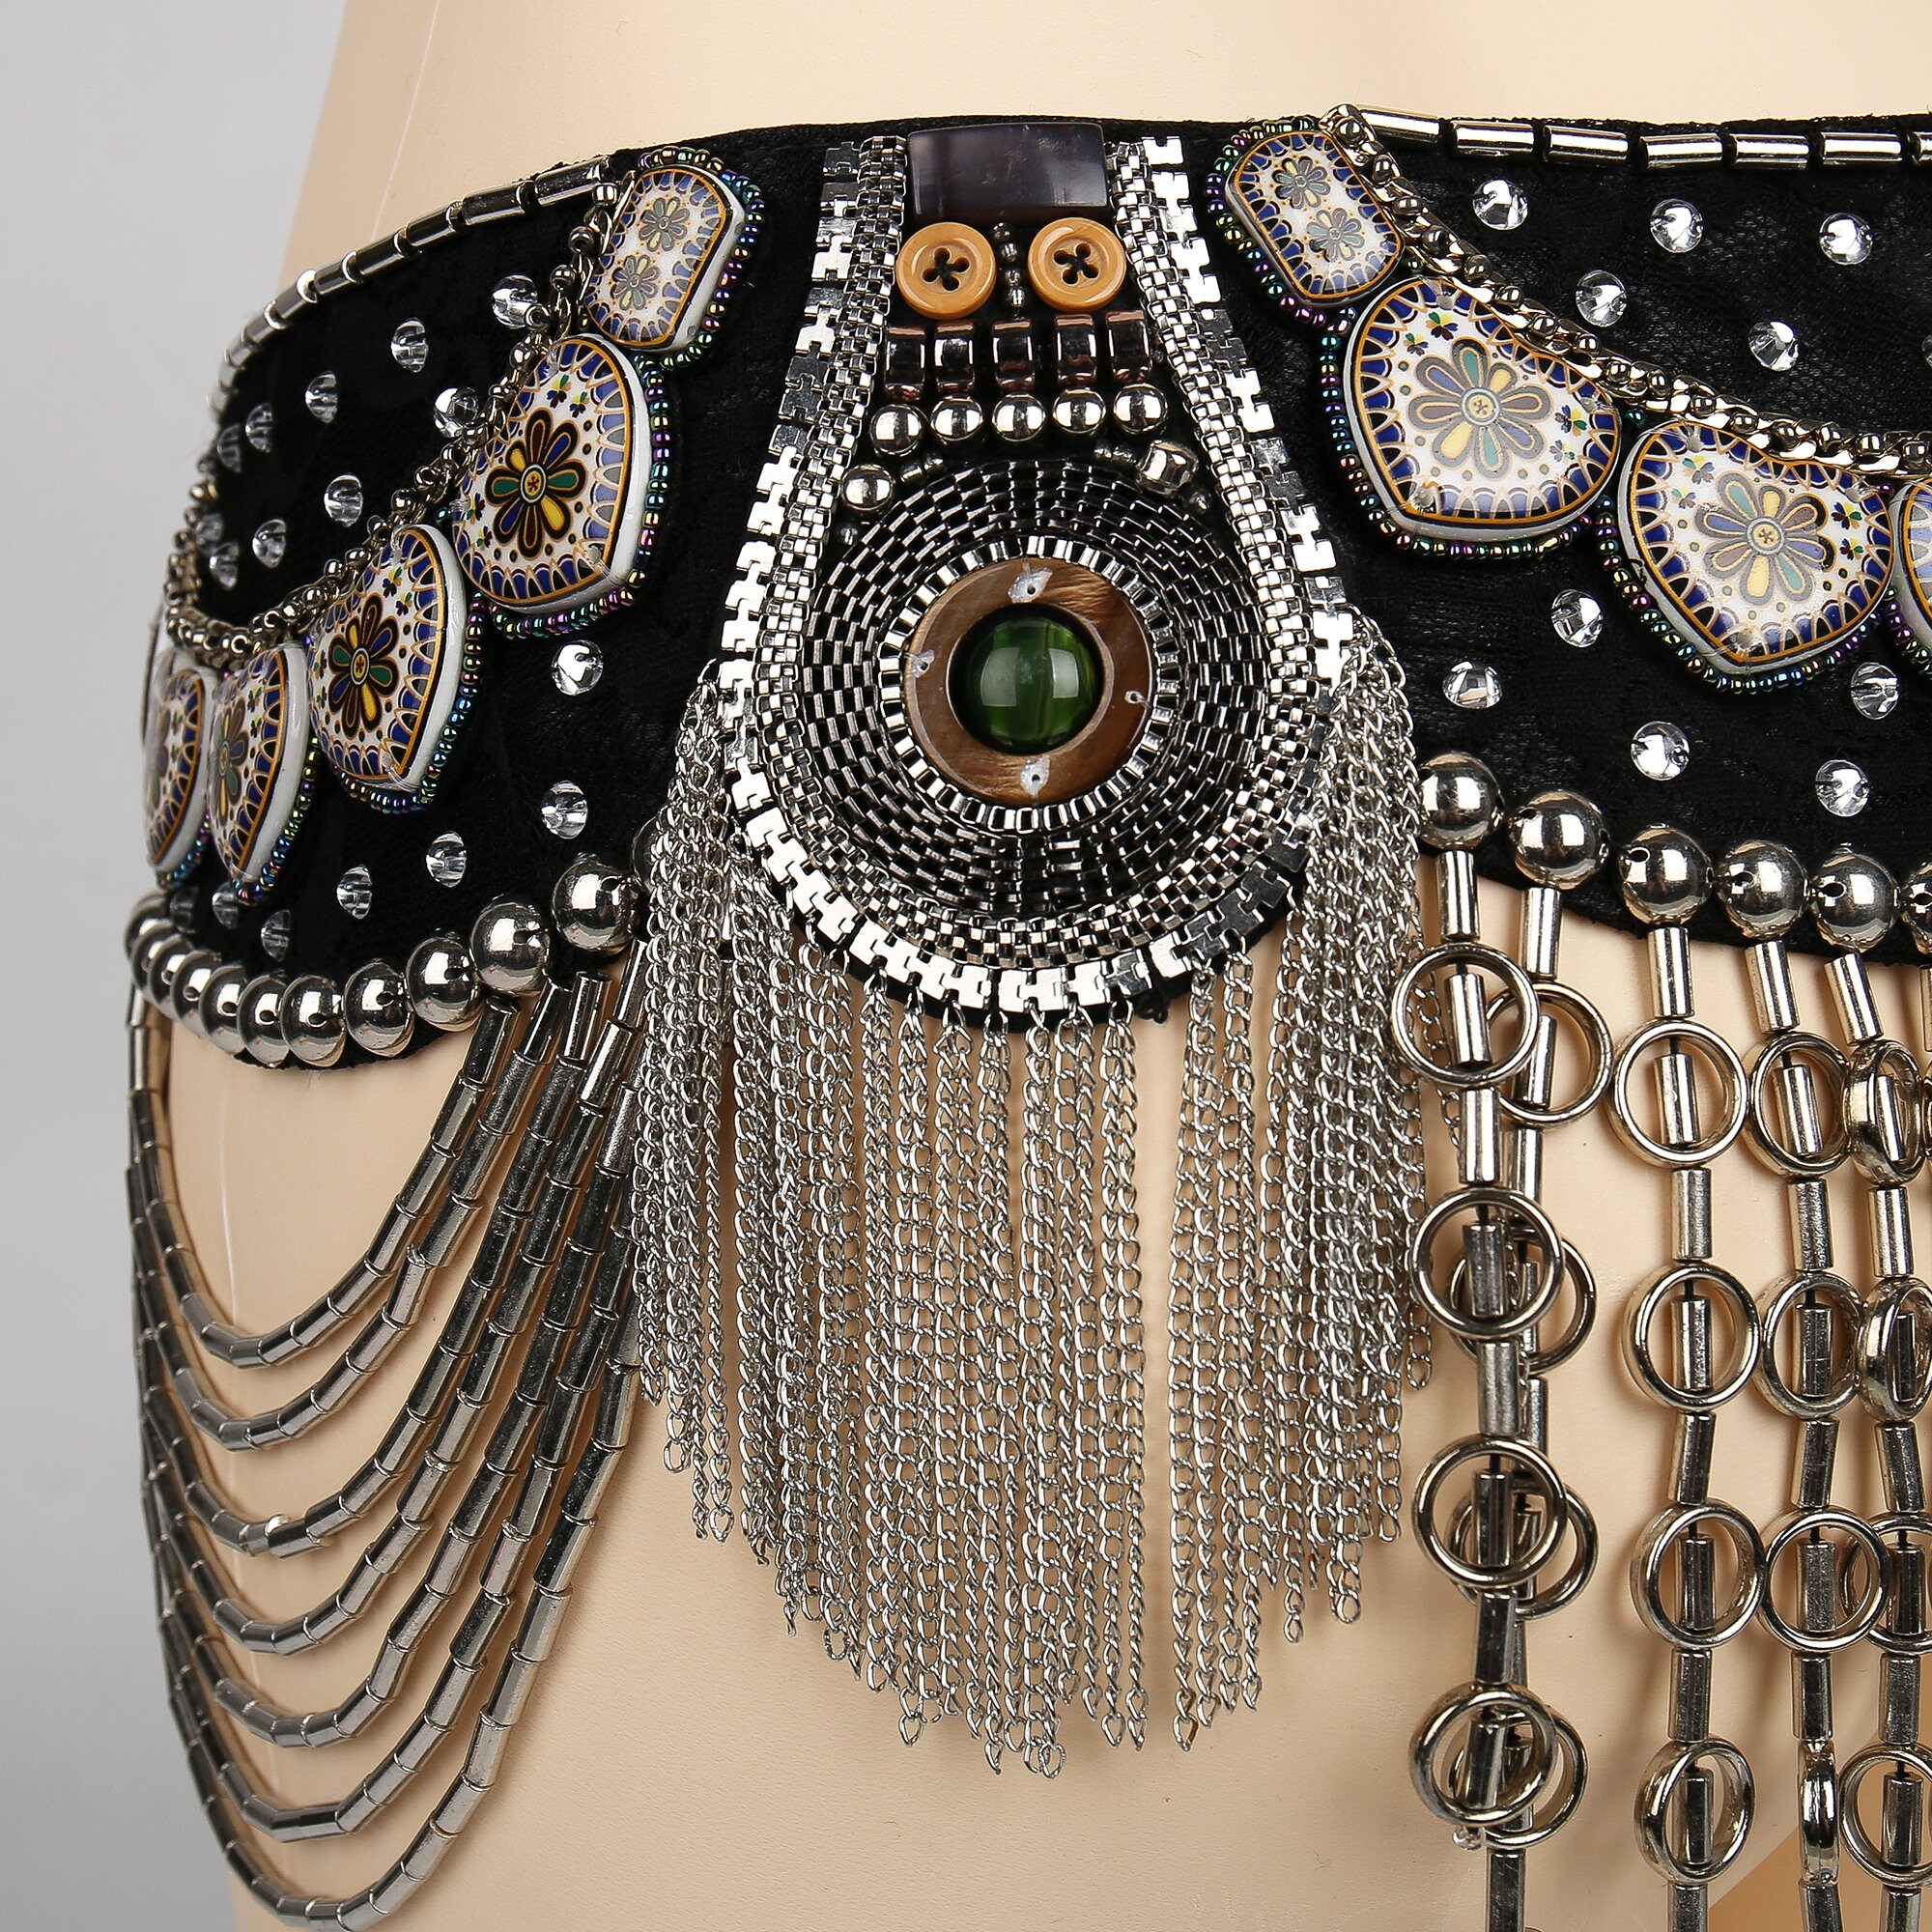 TRIBAL CARNIVAL KUCHI BELLY DANCE  TRIBAL BELT  COINS BUTTONS BEADS CHAINS 